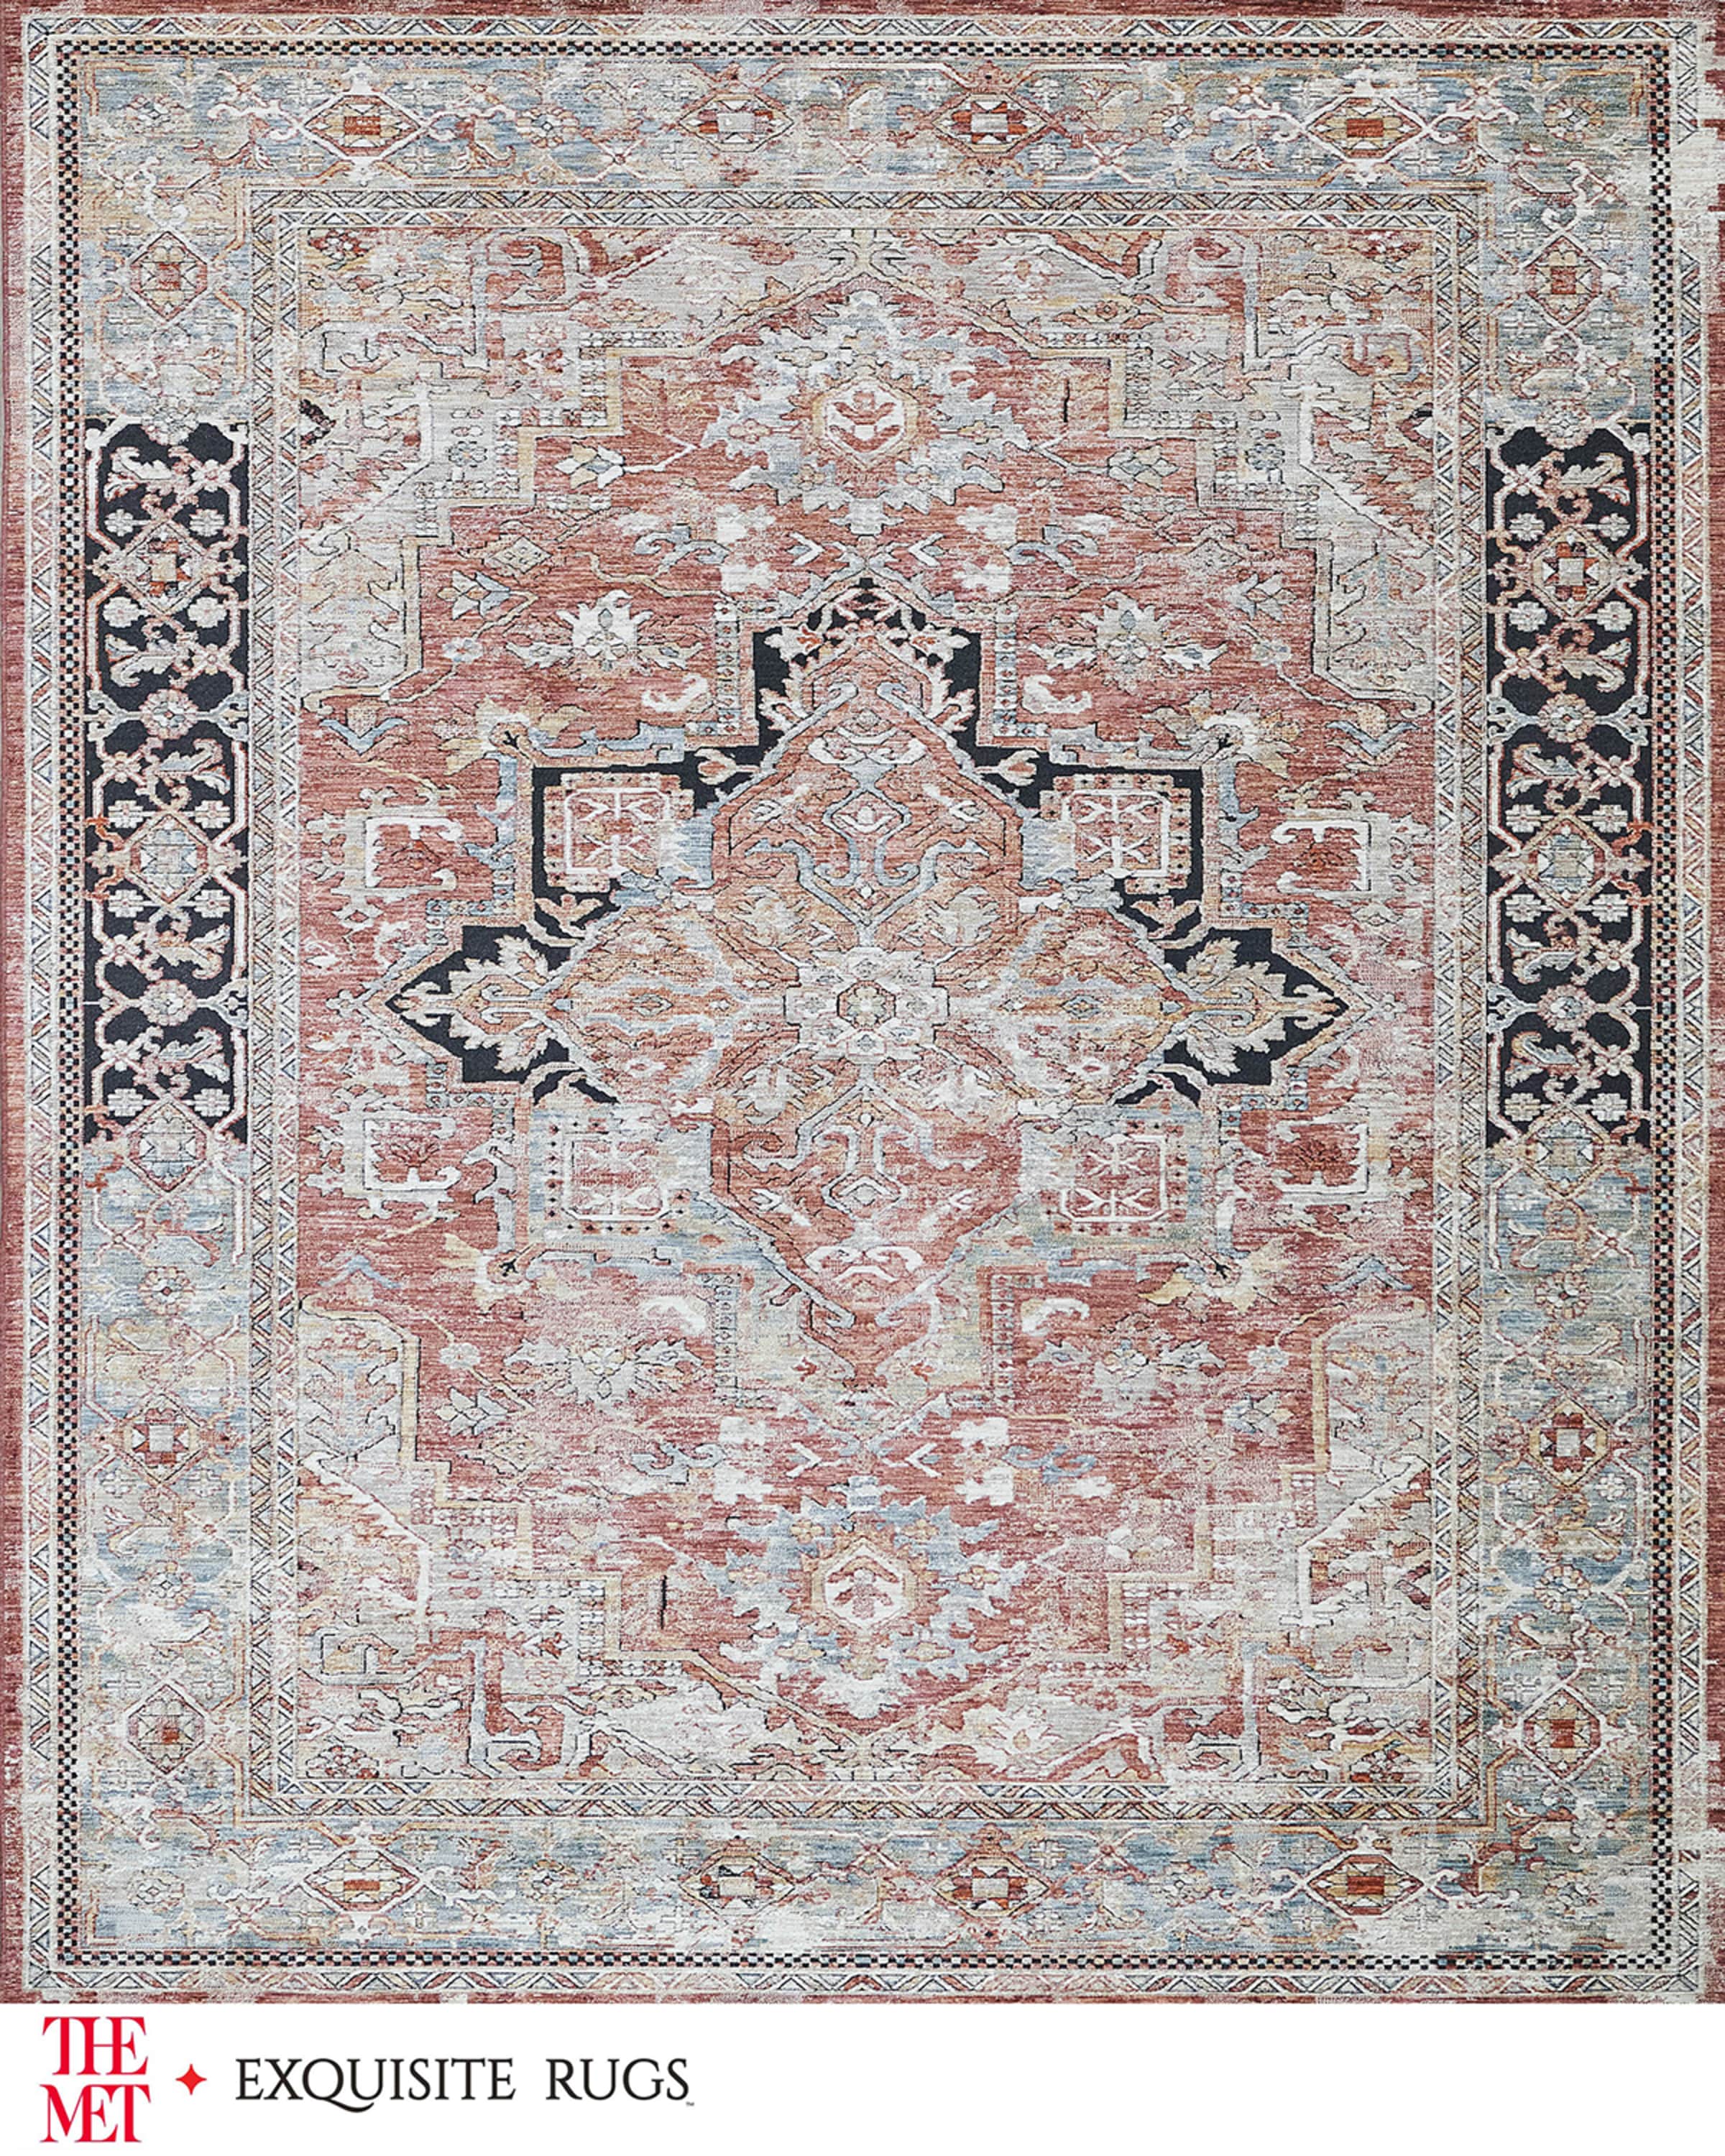 Exquisite Rugs x THE MET Antique Rust and Black Rug Collection ...